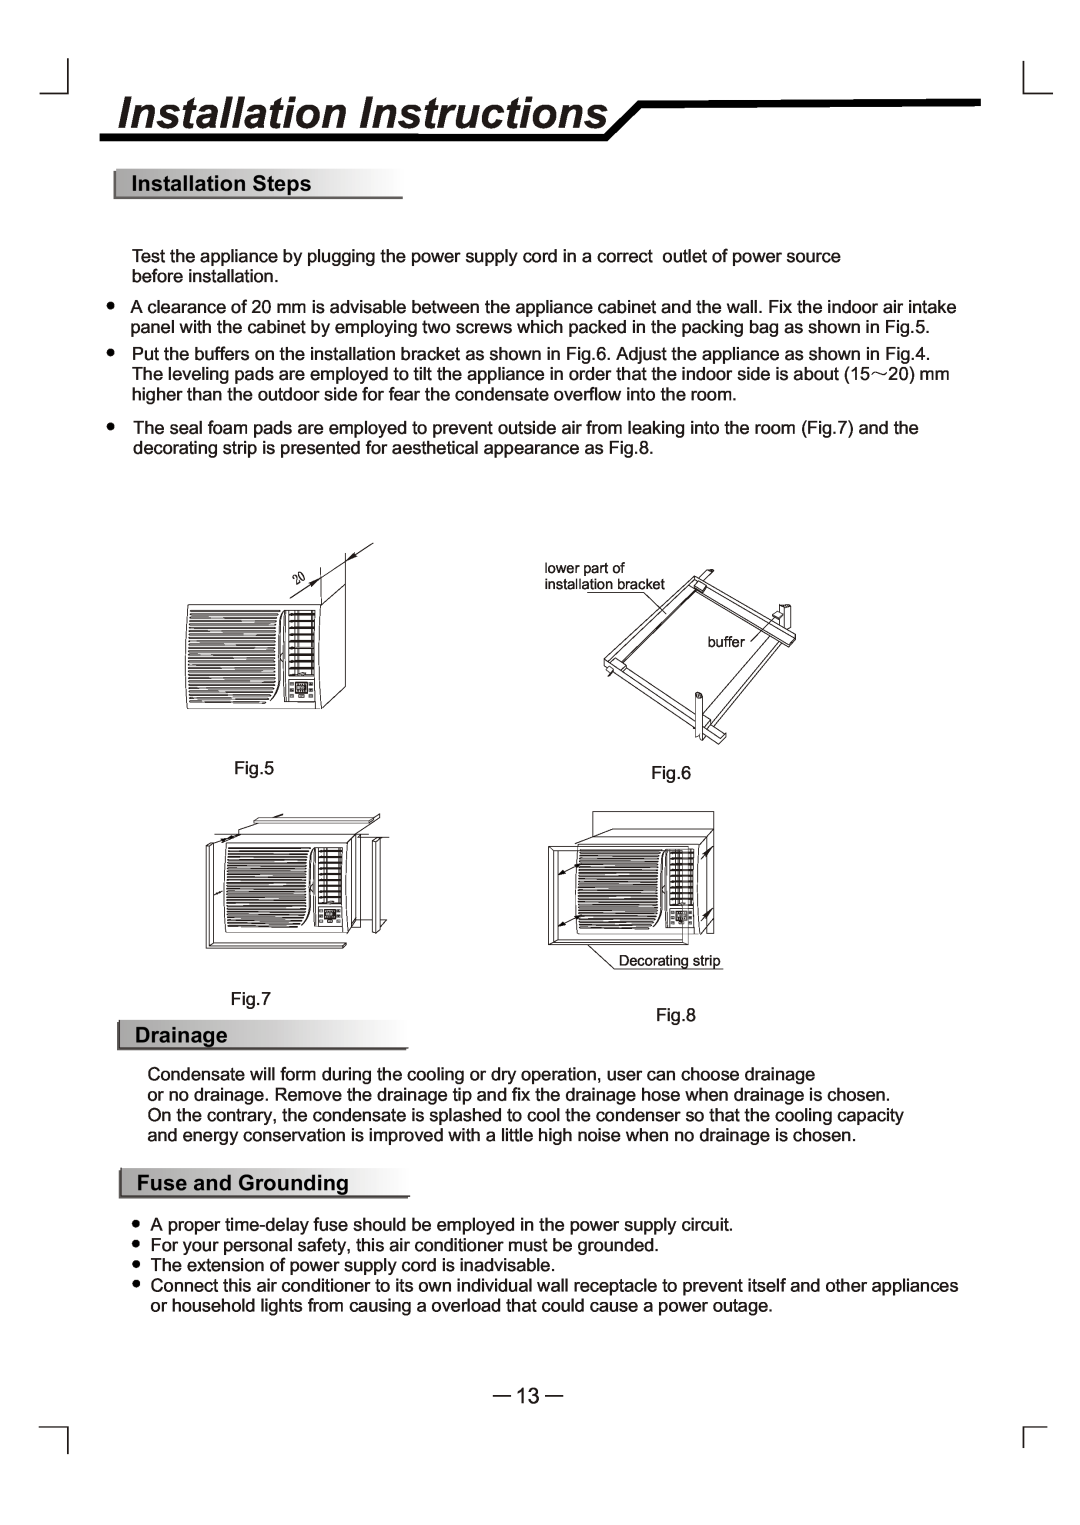 NEC RWC-3217, RWC-4717 user manual Installation Instructions, Accessories, Installation Steps, Drainage, Fuse and Grounding 